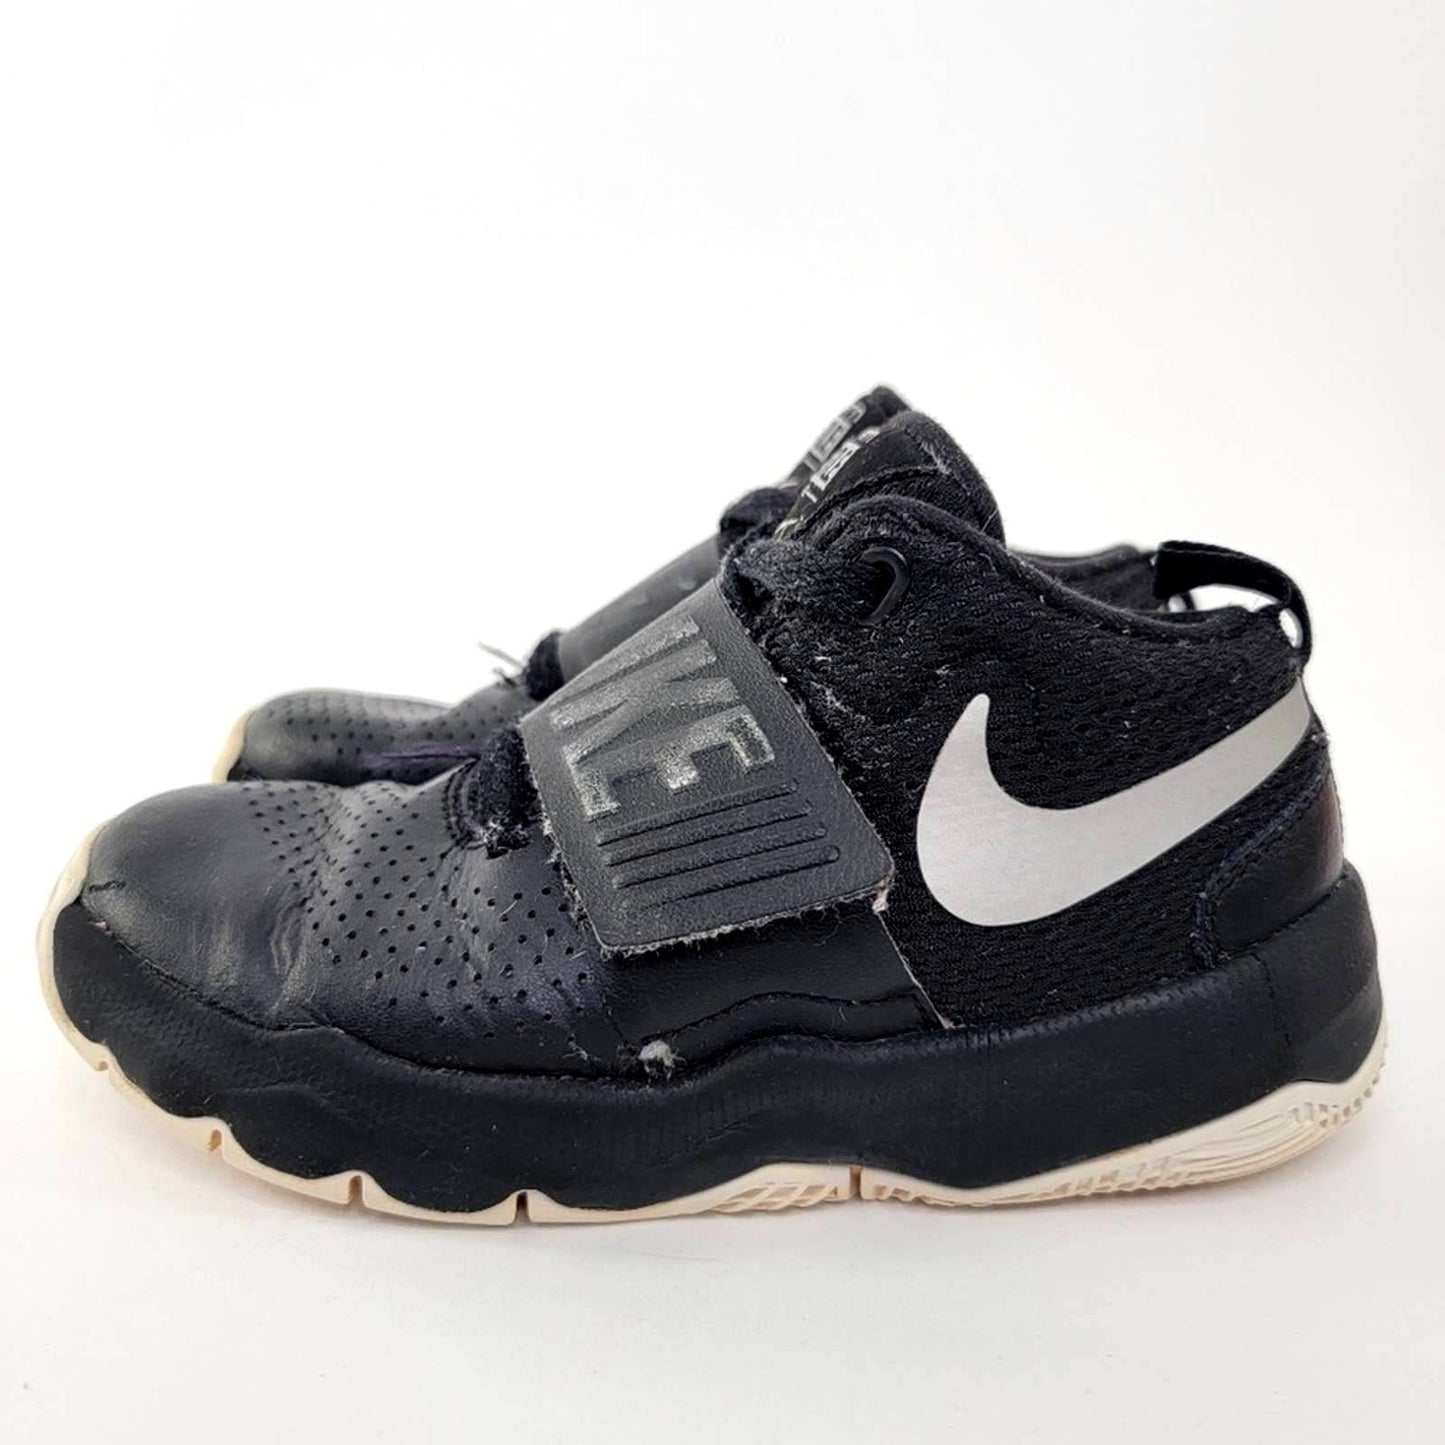 Nike Team Hustle D 8 (GS) Youth Athletic Shoes